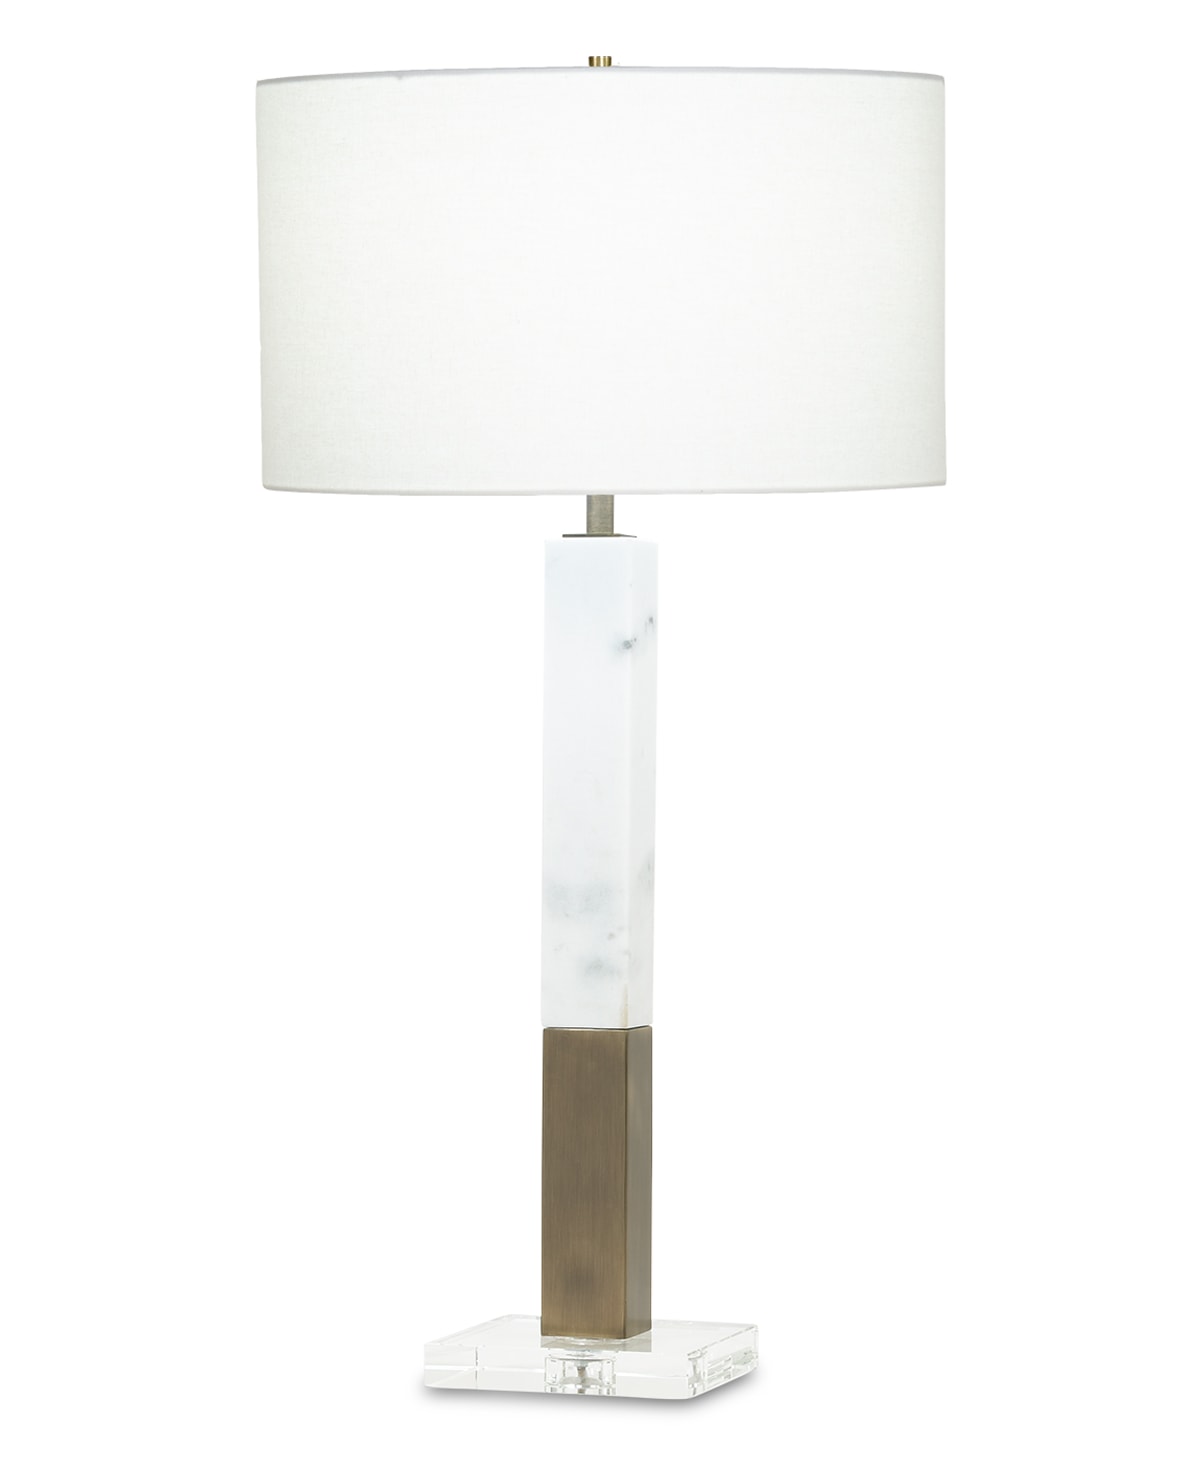 FlowDecor Sanders Table Lamp in white marble and metal with antique brass finish and crystal base and off-white linen drum shade (# 3822)